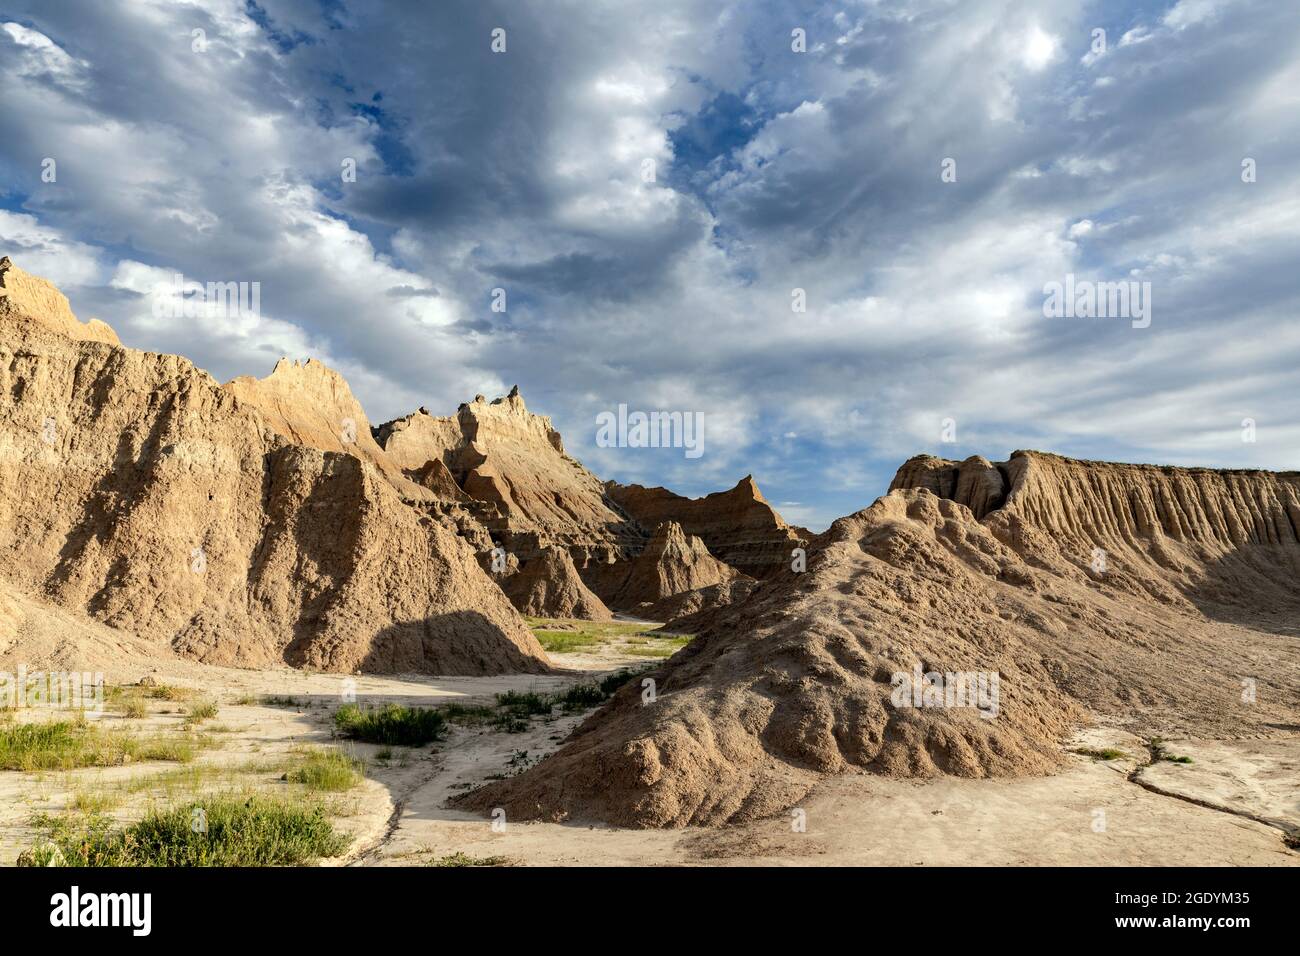 SD00470-00....SOUTH DAKOTA - Buttes near Fossil Exhibit Trail in Badlands National Park. Stock Photo